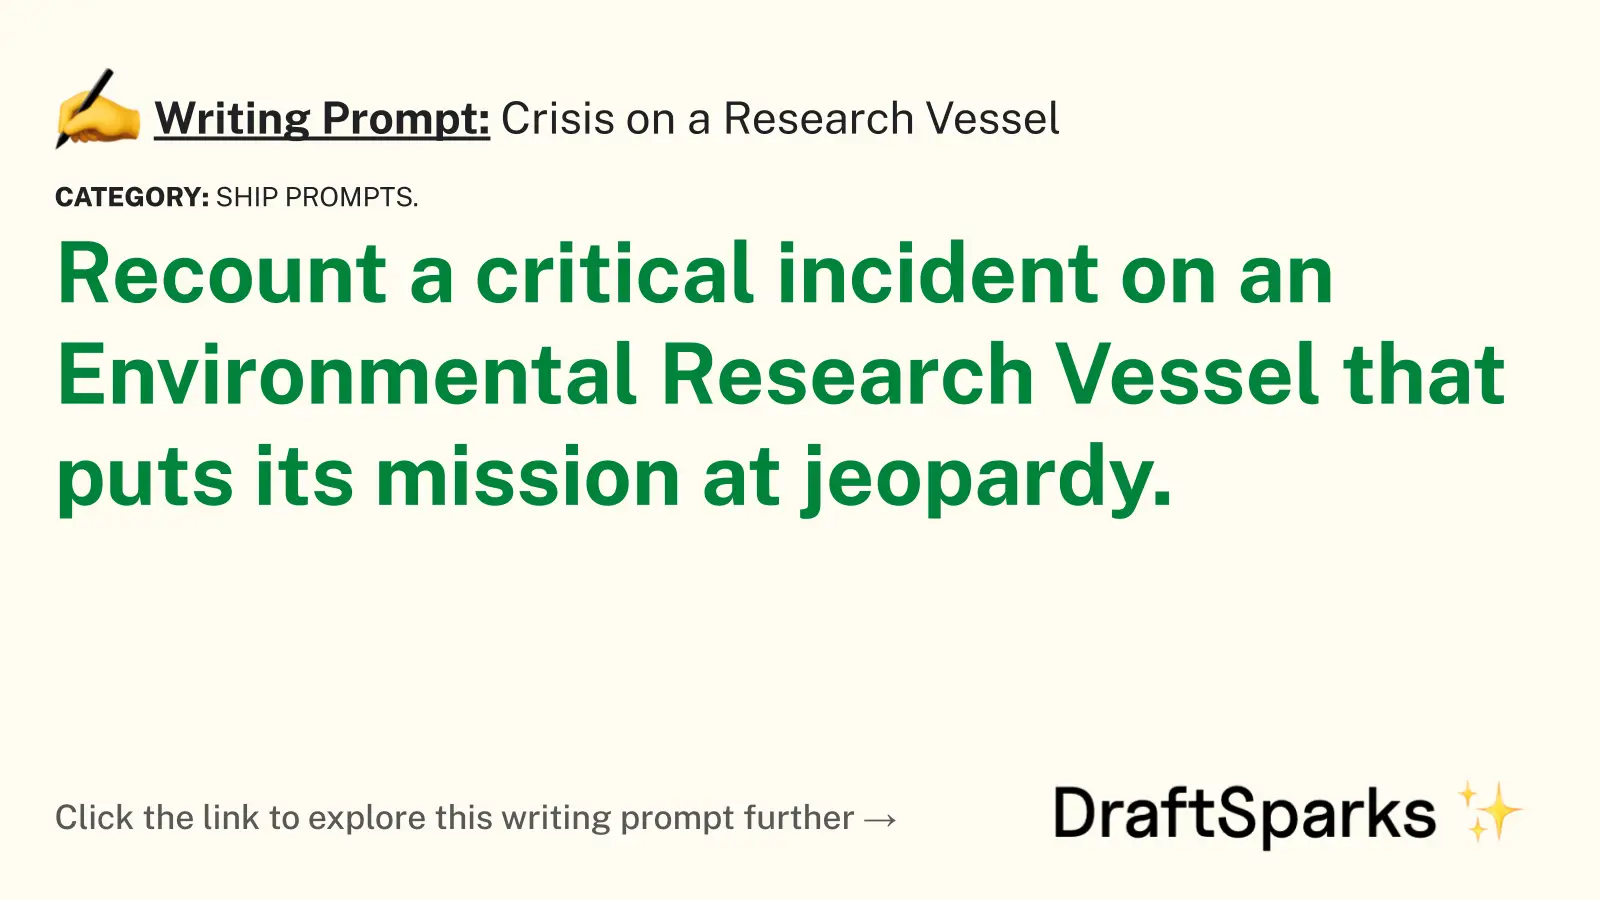 Crisis on a Research Vessel